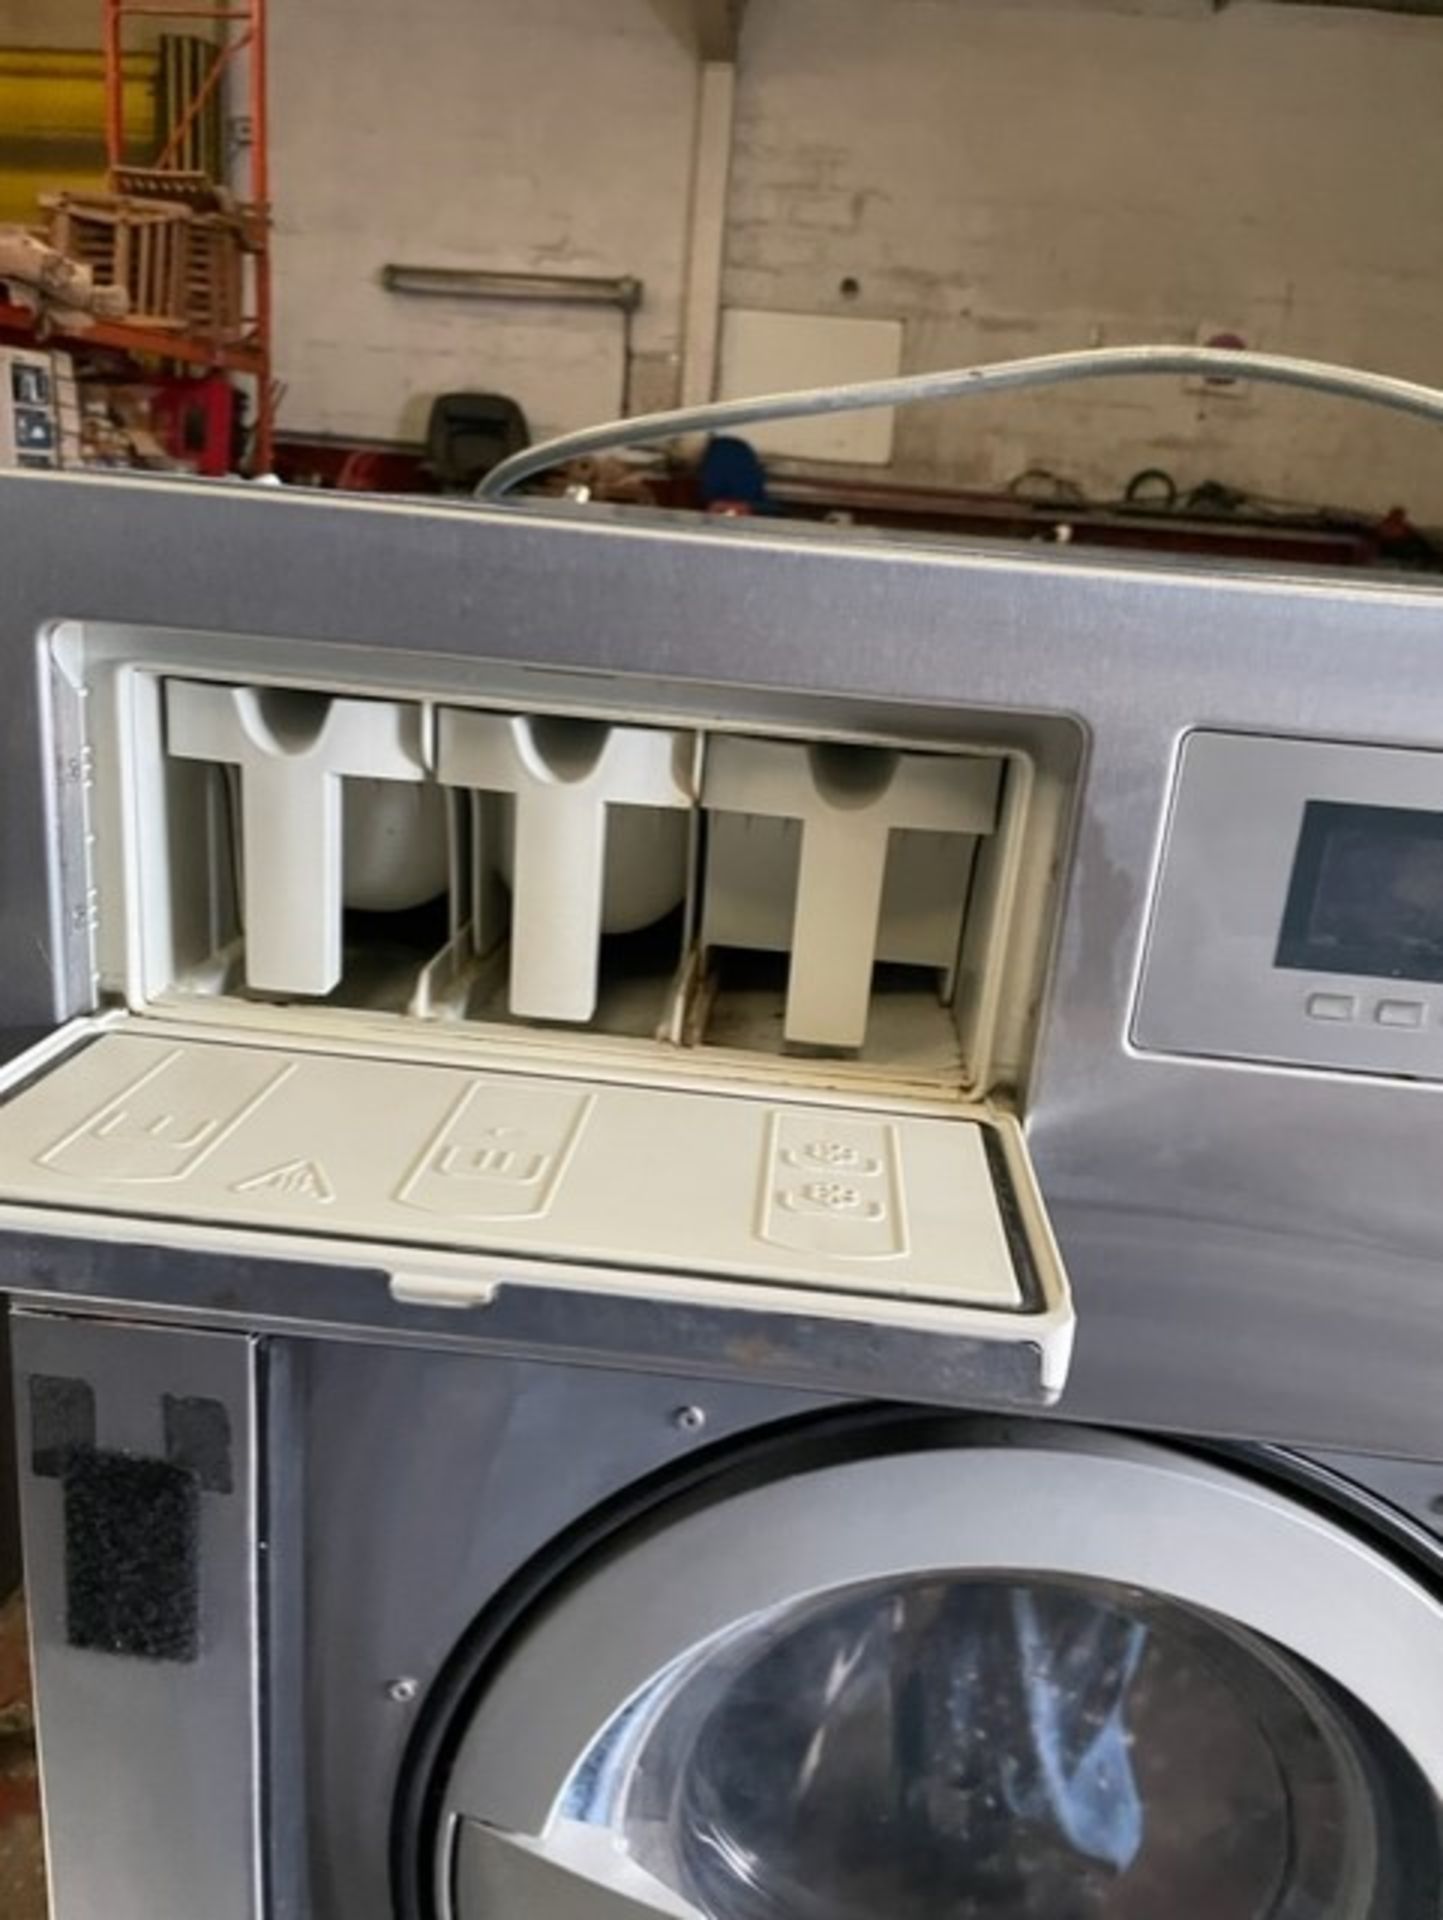 Miele washing machine 3 phase commercial it’s a pw008 and is in very good condition it has a 17kw - Image 6 of 7